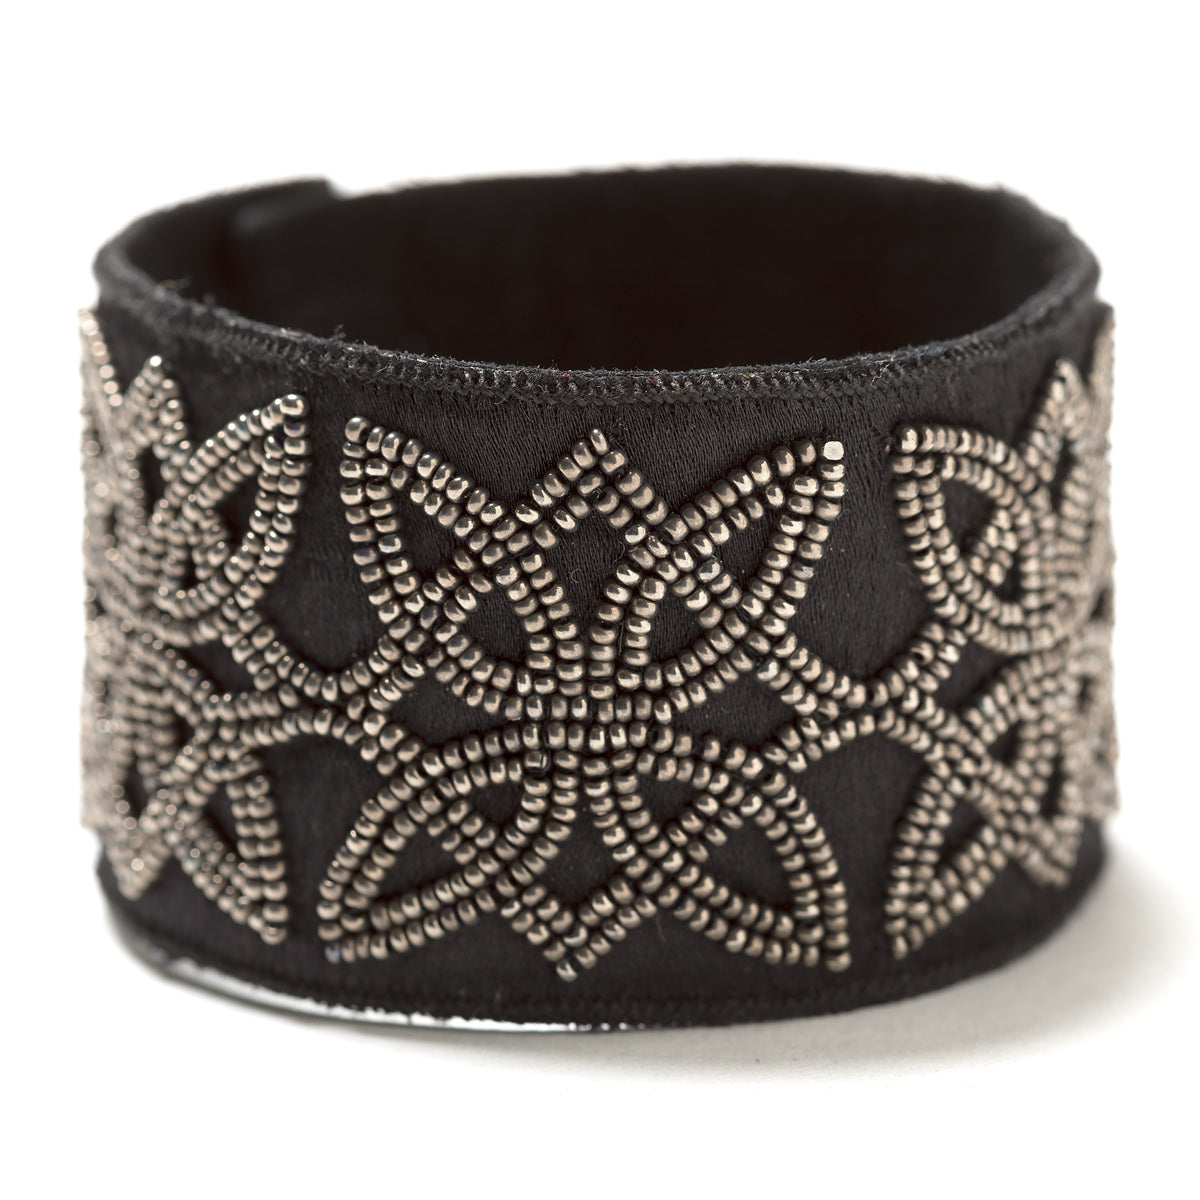 Lori Weitzner Ariadne Bracelet in Charcoal with Beading, Suede, Magnetic Closures